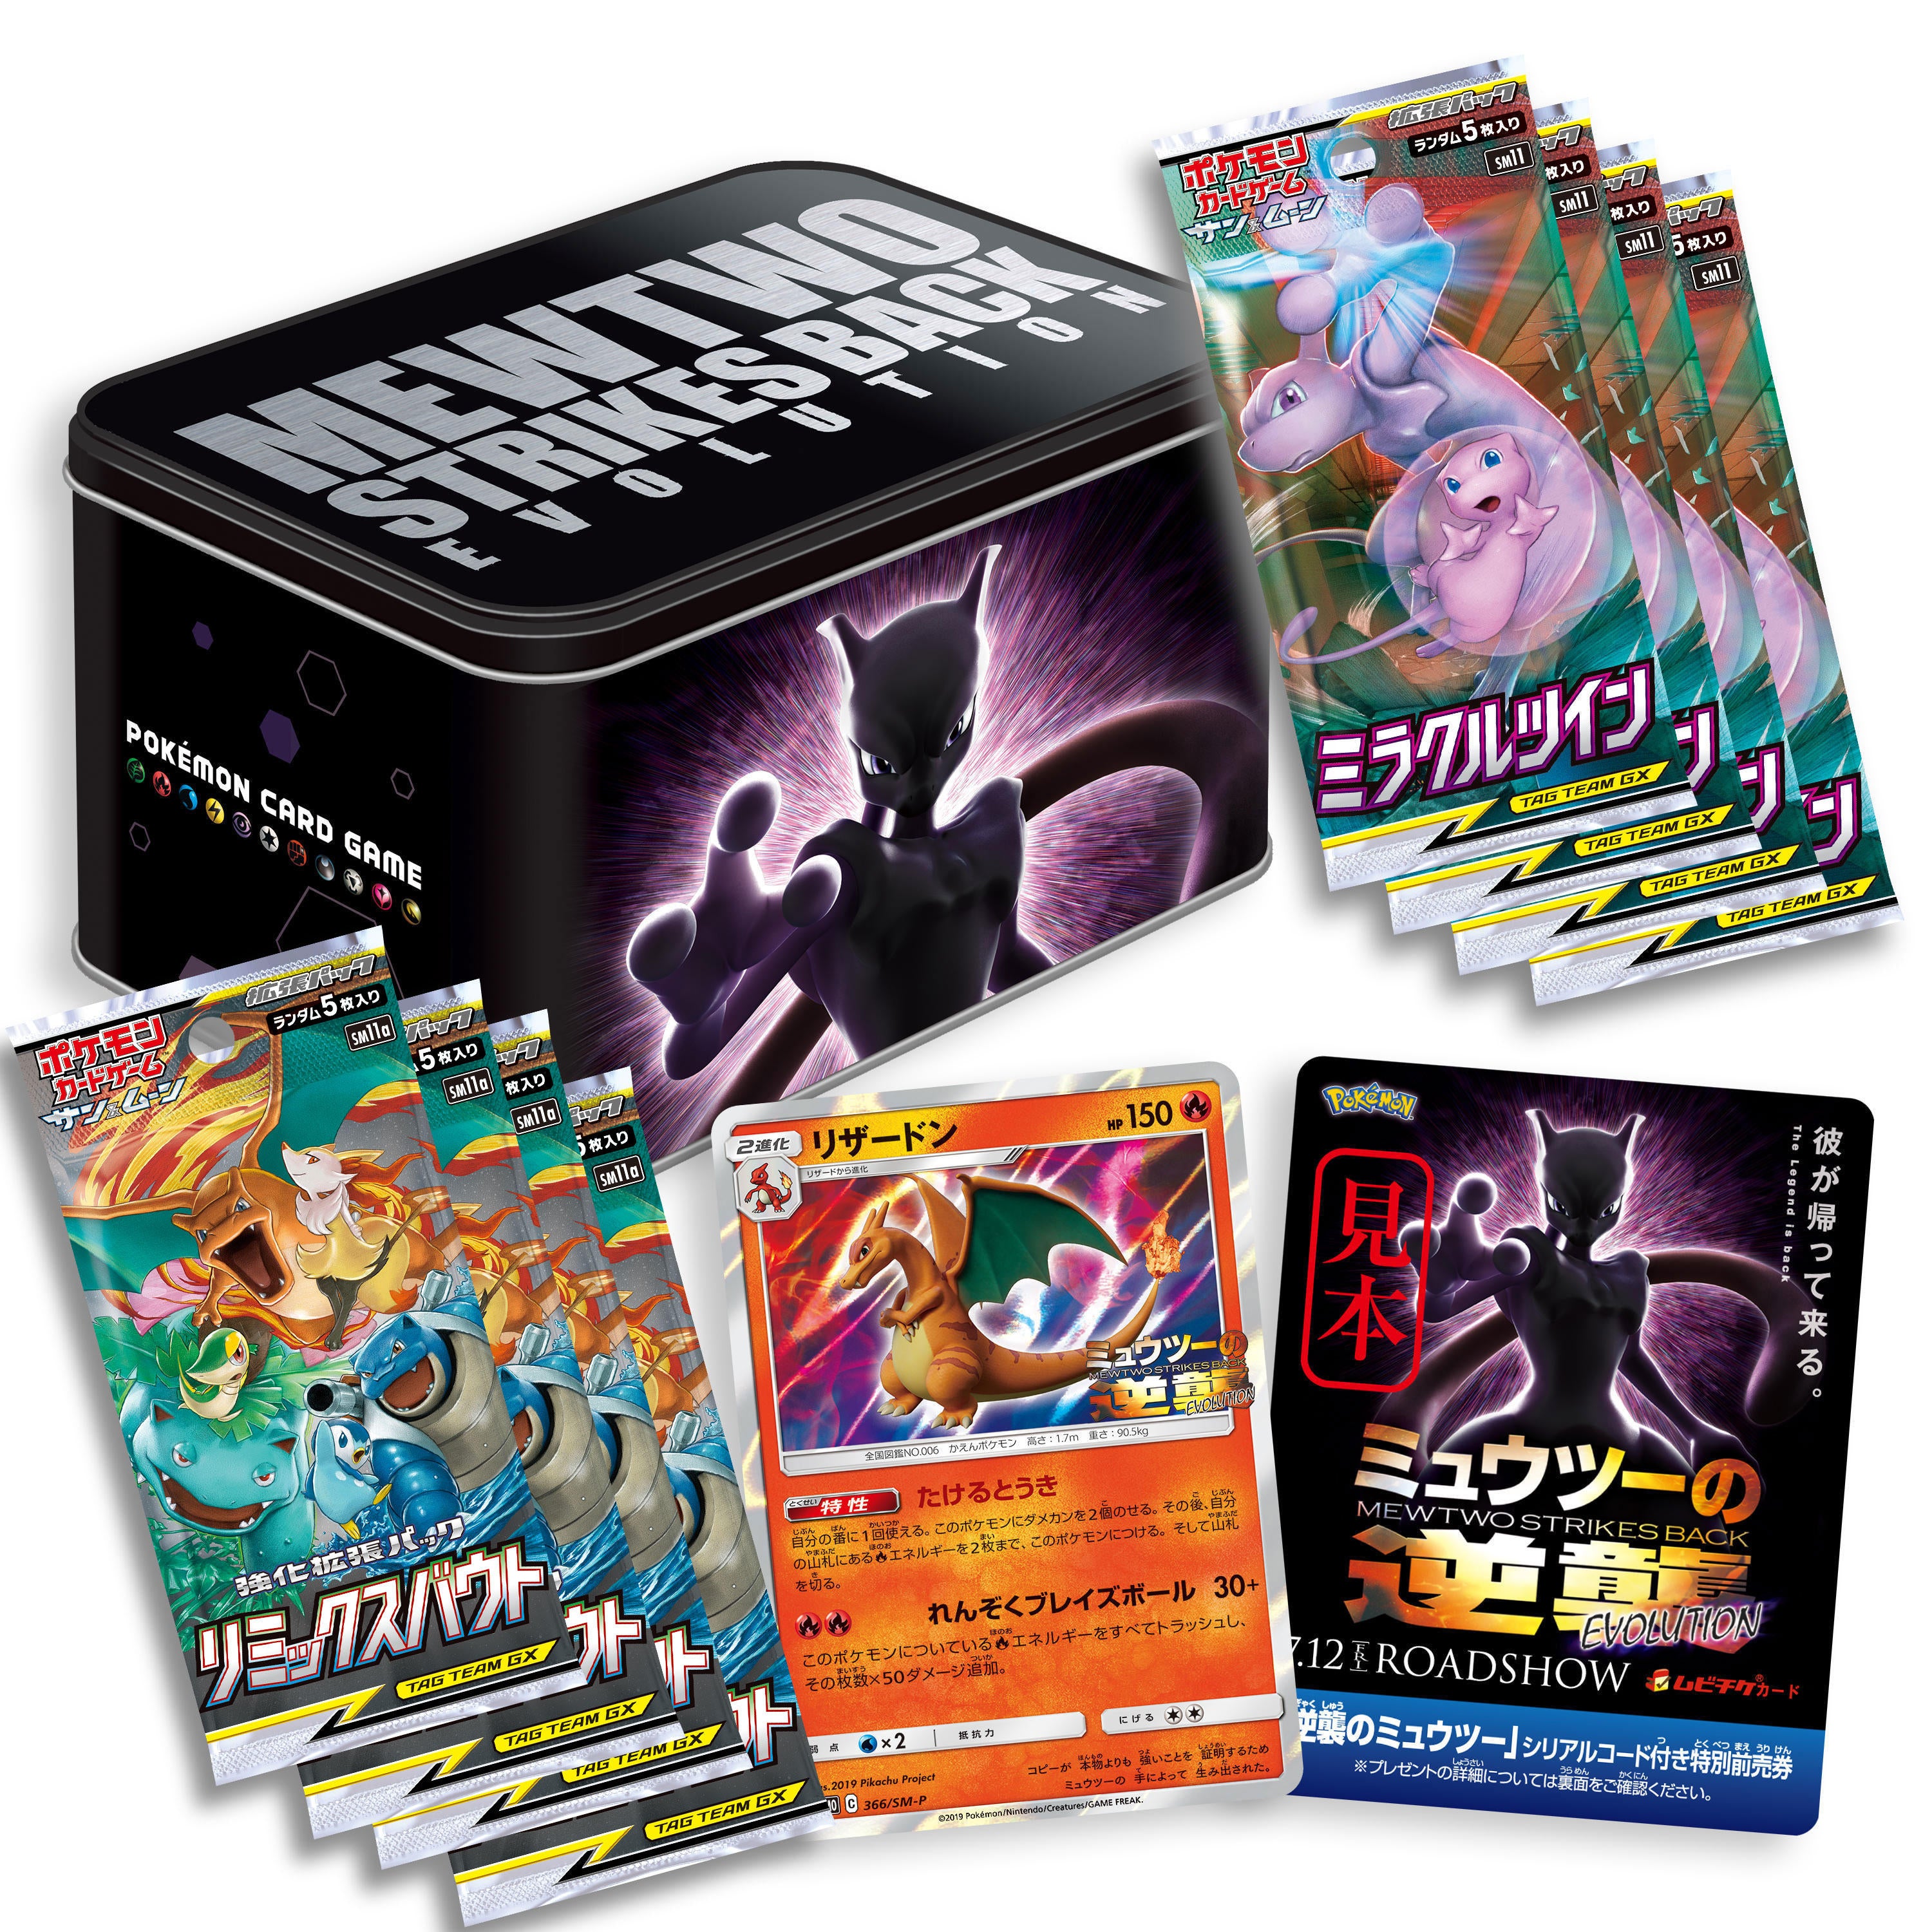 Pokémon The Movie: Mewtwo Strikes Back Evolution Seven-Eleven limited set with special advance ticket